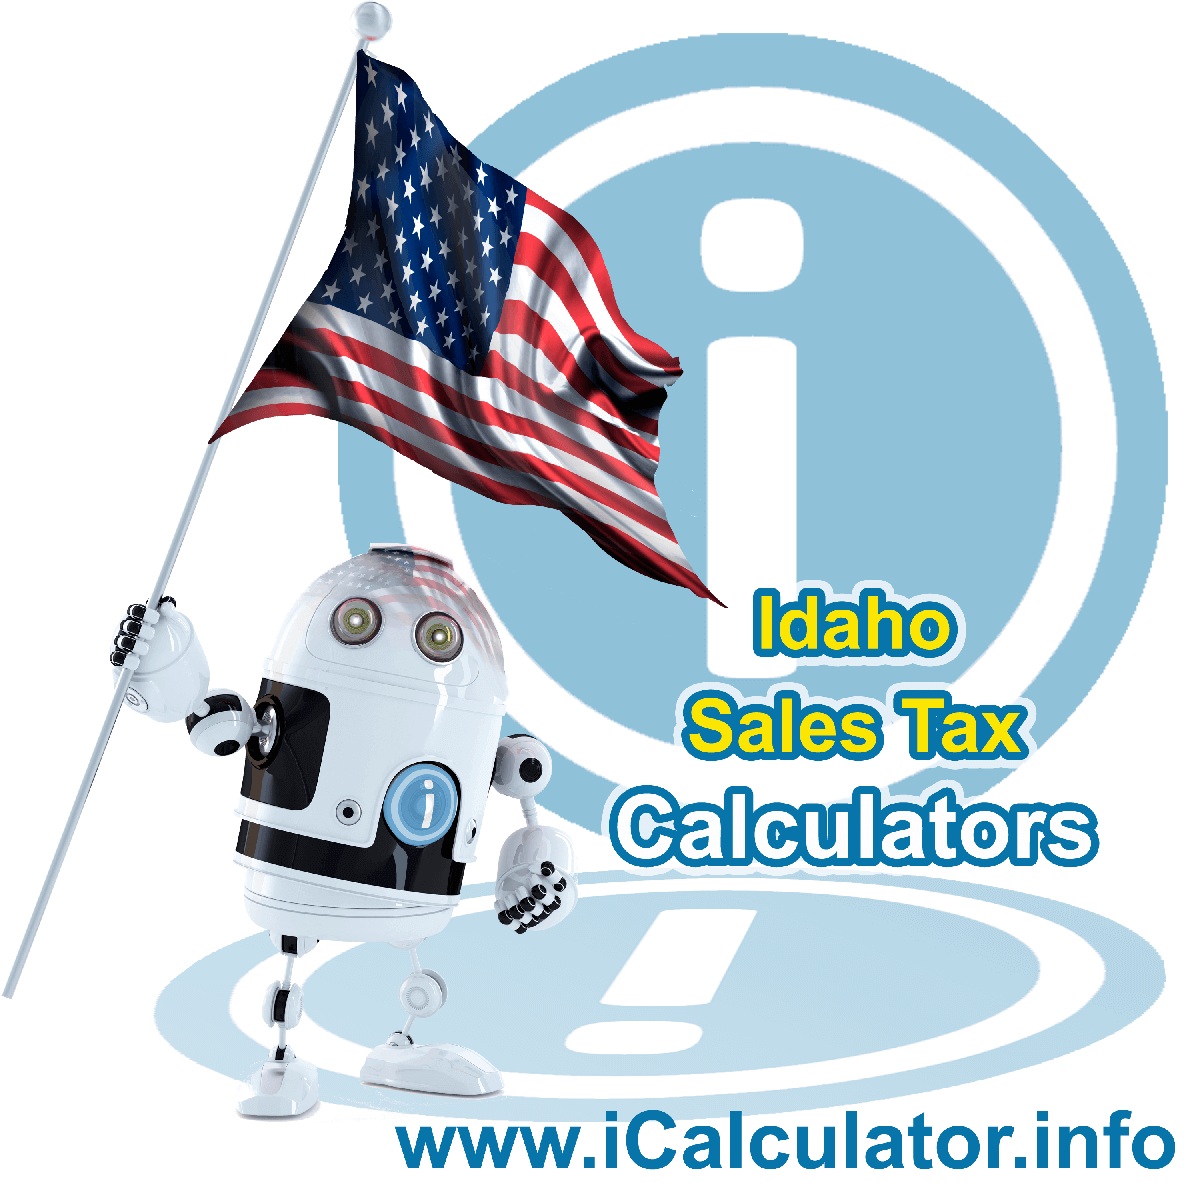 Boise Sales Rates: This image illustrates a calculator robot calculating Boise sales tax manually using the Boise Sales Tax Formula. You can use this information to calculate Boise Sales Tax manually or use the Boise Sales Tax Calculator to calculate sales tax online.